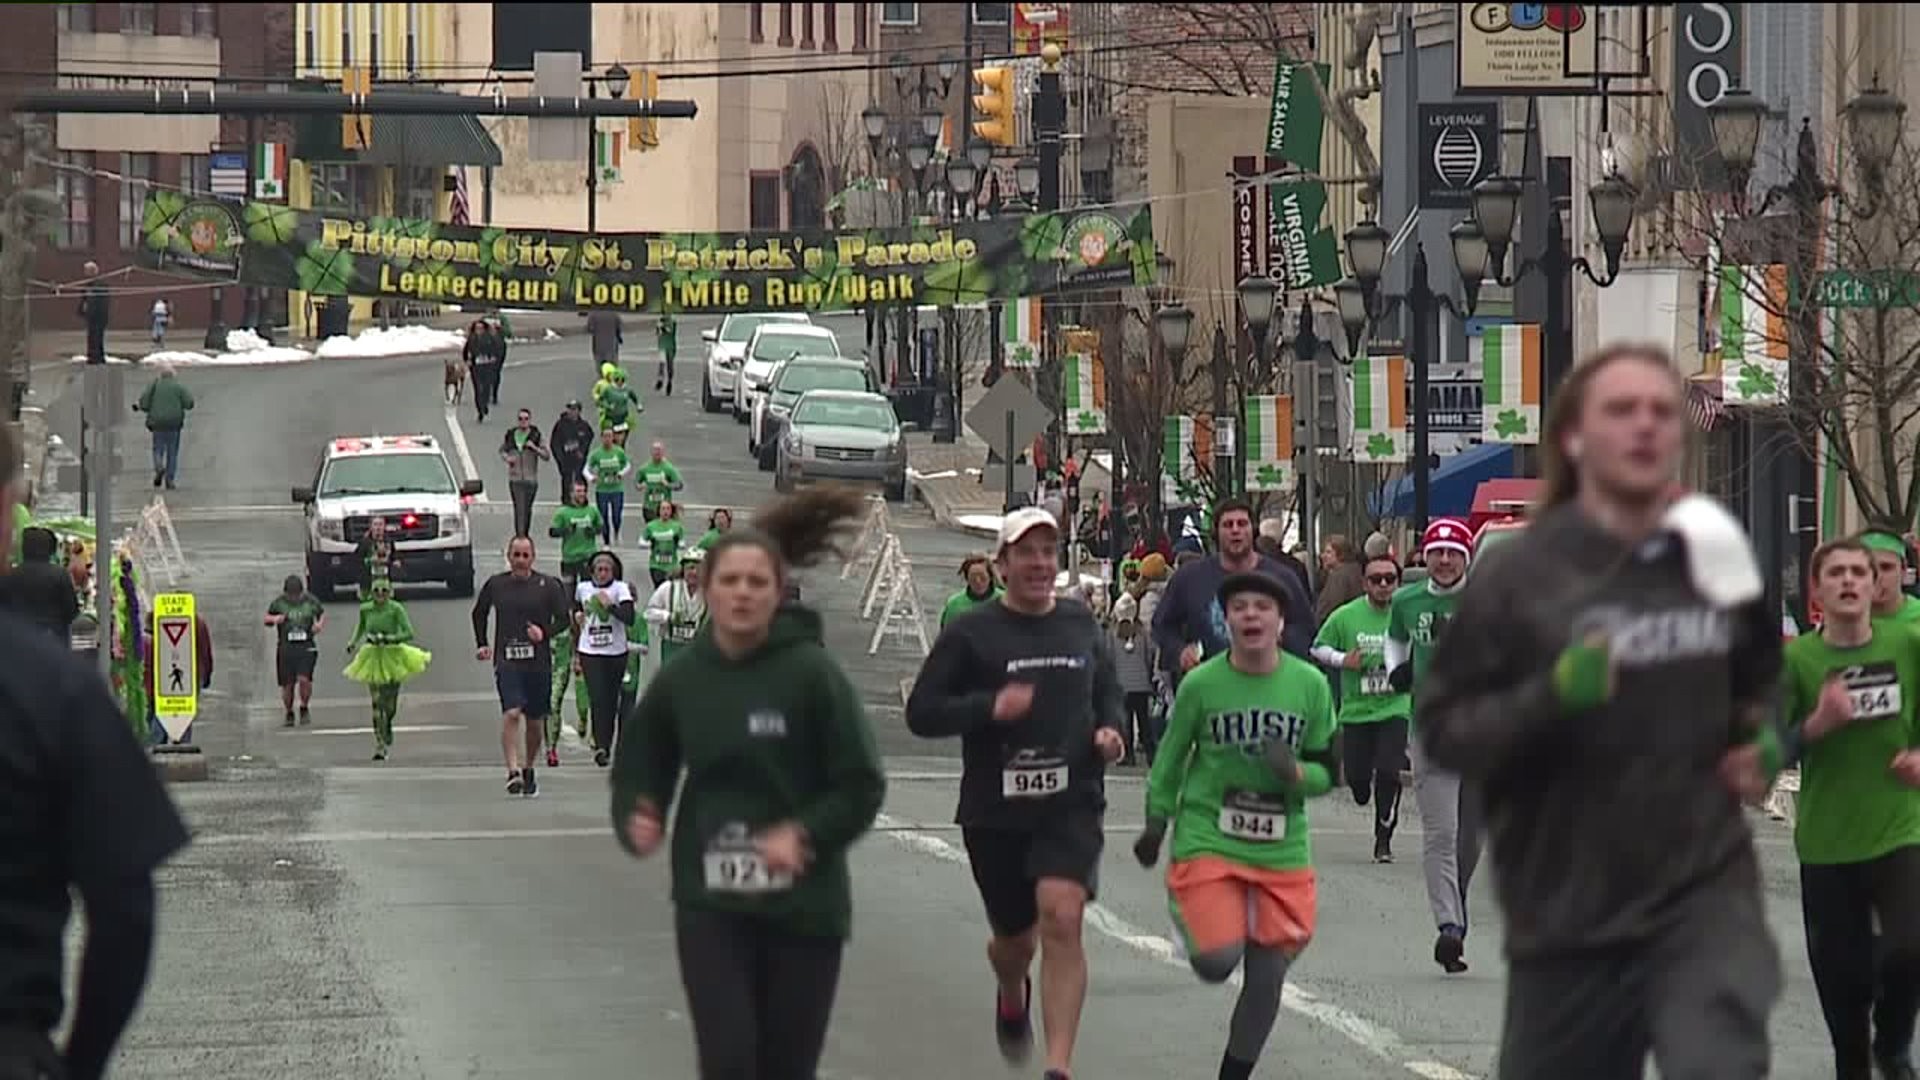 Sprinting in Green for a Cause